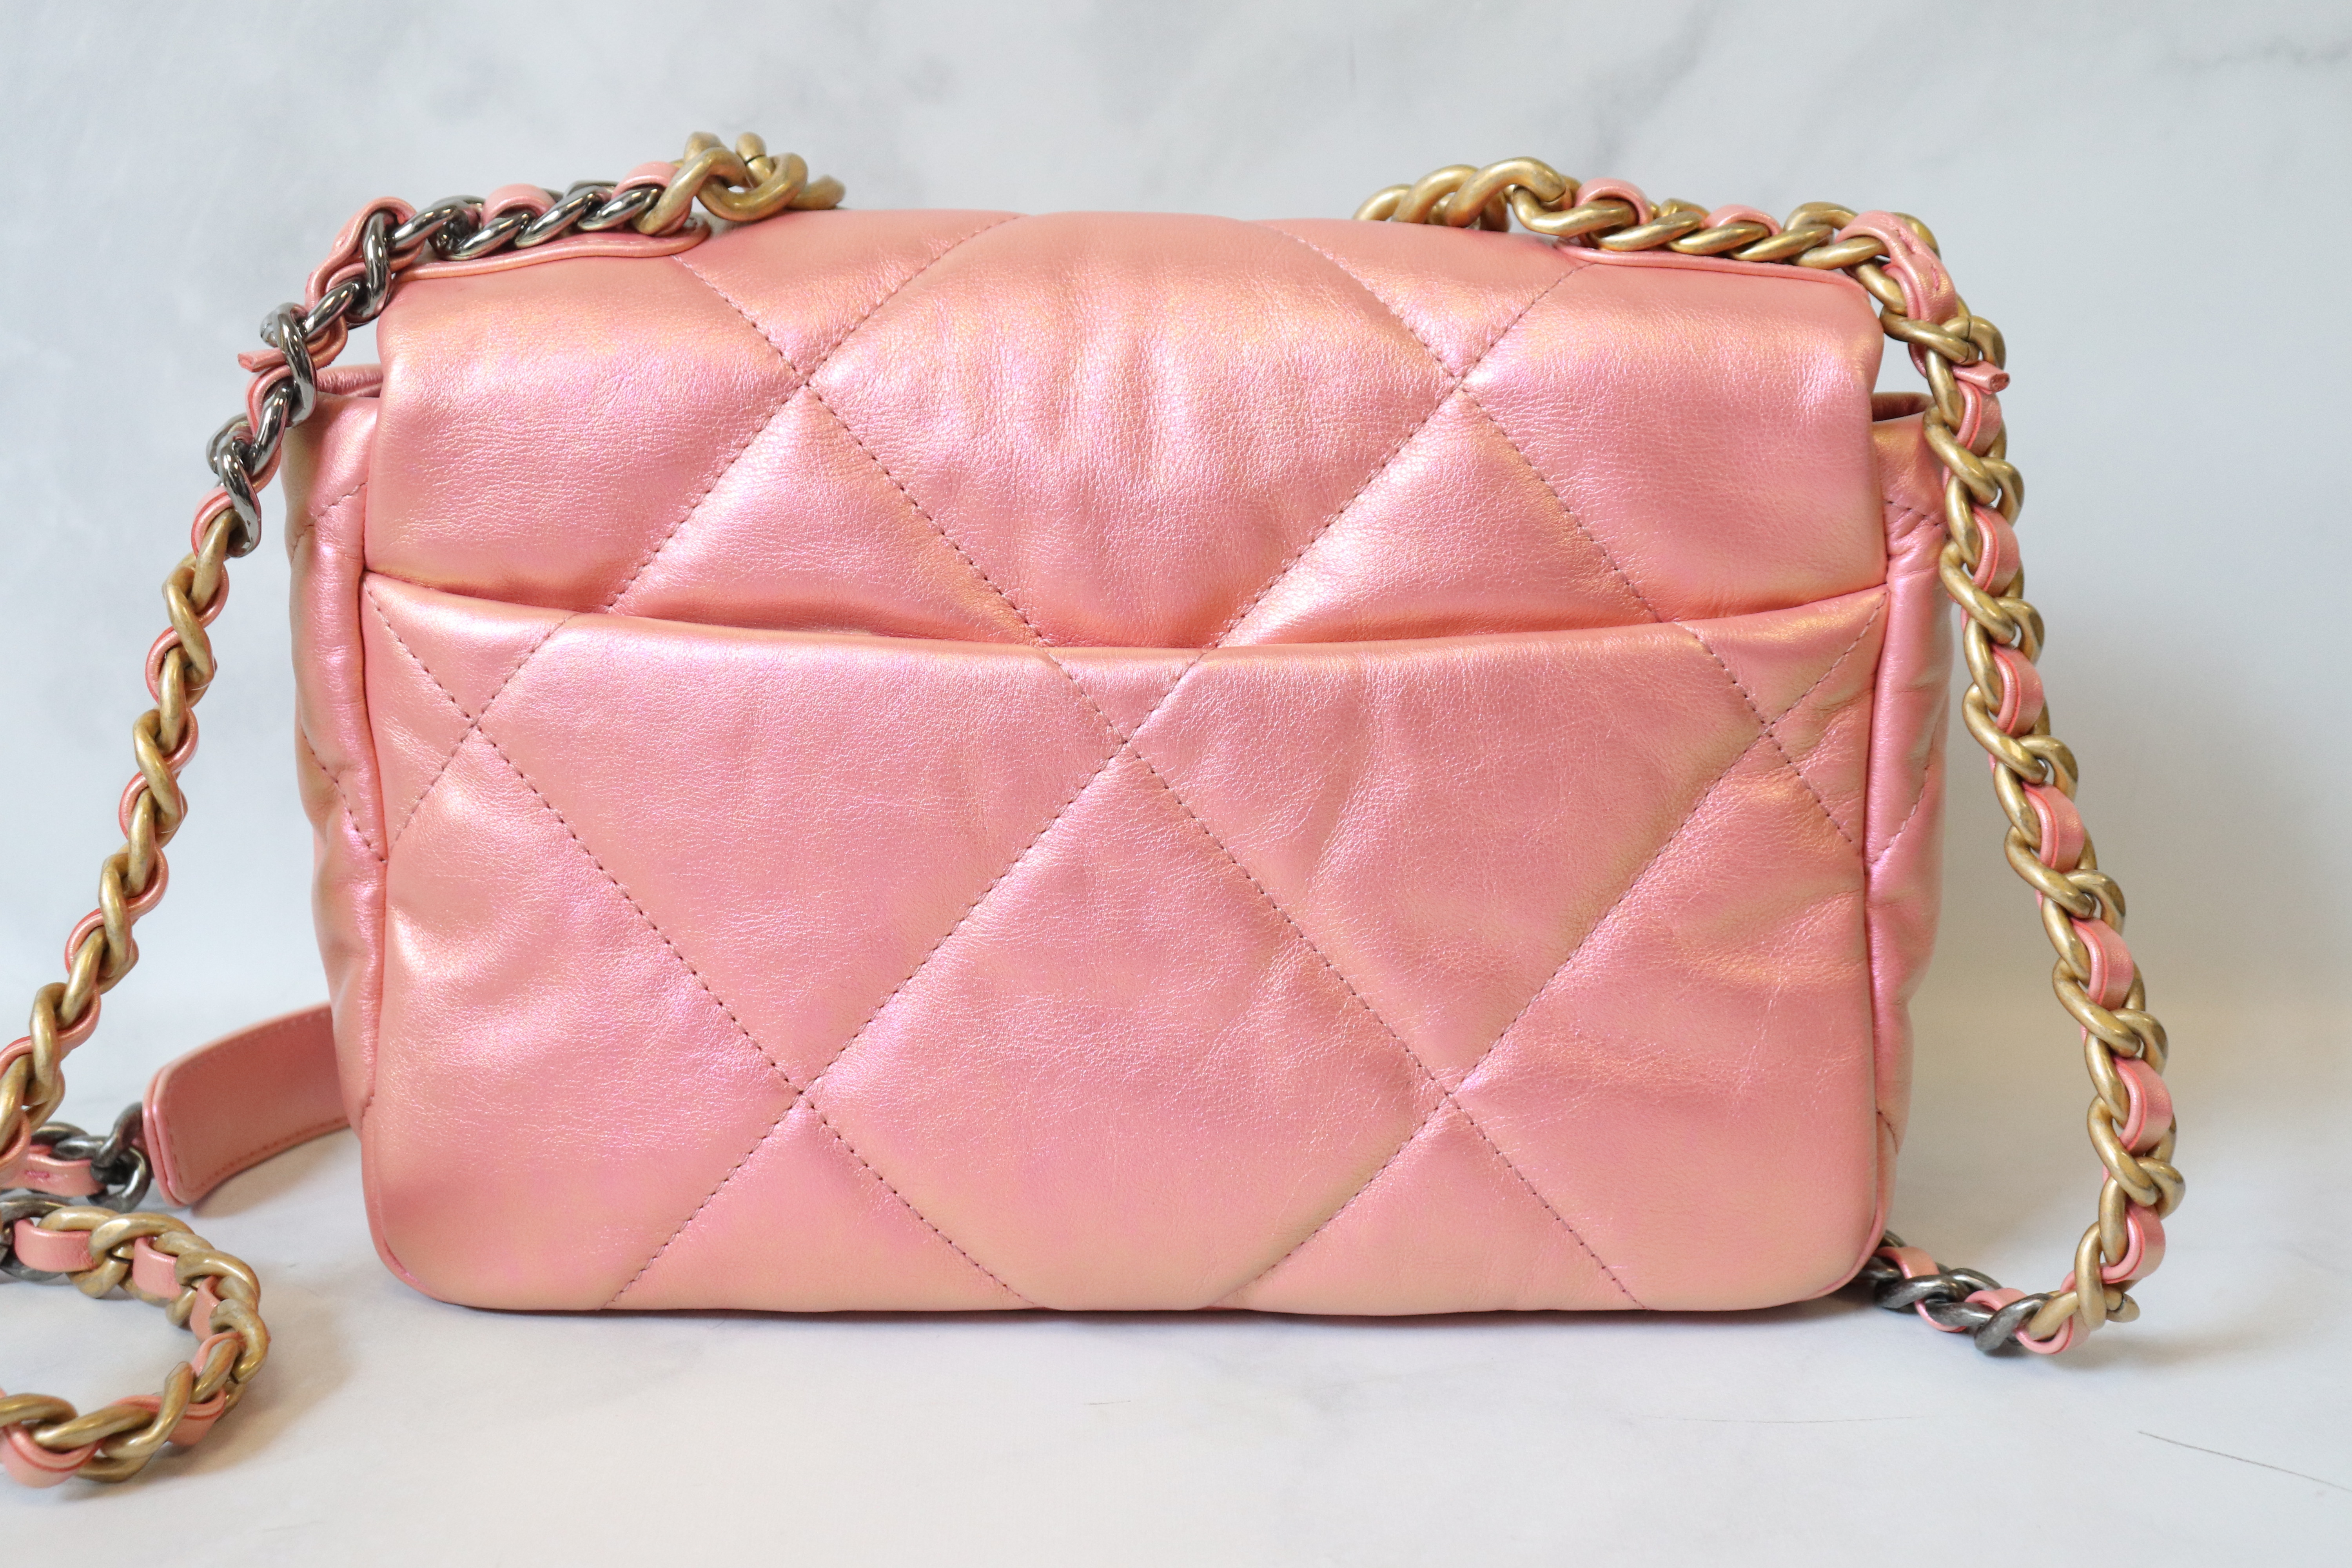 Chanel 19 leather handbag Chanel Pink in Leather - 36894698